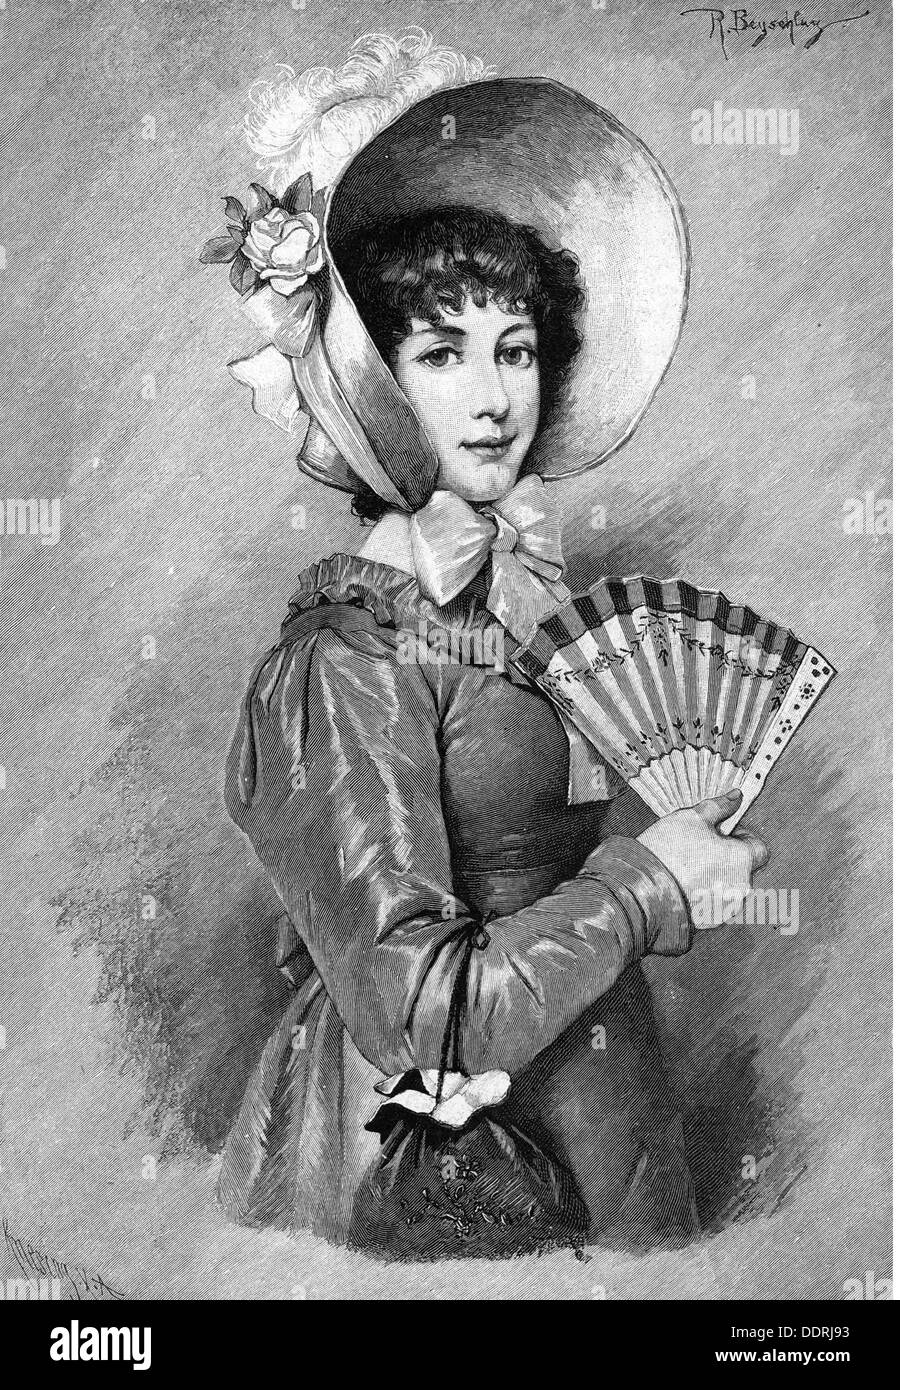 fashion, 19th century, young woman with hat of the Biedermeier period, after drawing by Rudolf Beyschlag (1838 -1903), wood engraving by Theodor Knesing, 19th century, 19th century, graphic, graphics, Biedermeier, ladies' fashion, clothes, outfit, outfits, dress, dresses, half length, standing, headpiece, headpieces, hat, hats, feather, feathers, bow, flower, flowers, holding, hold, fan, fans, bag, bags, fashion for women, women's clothing, historic, historical, woman, women, female, people, NOT, Additional-Rights-Clearences-Not Available Stock Photo